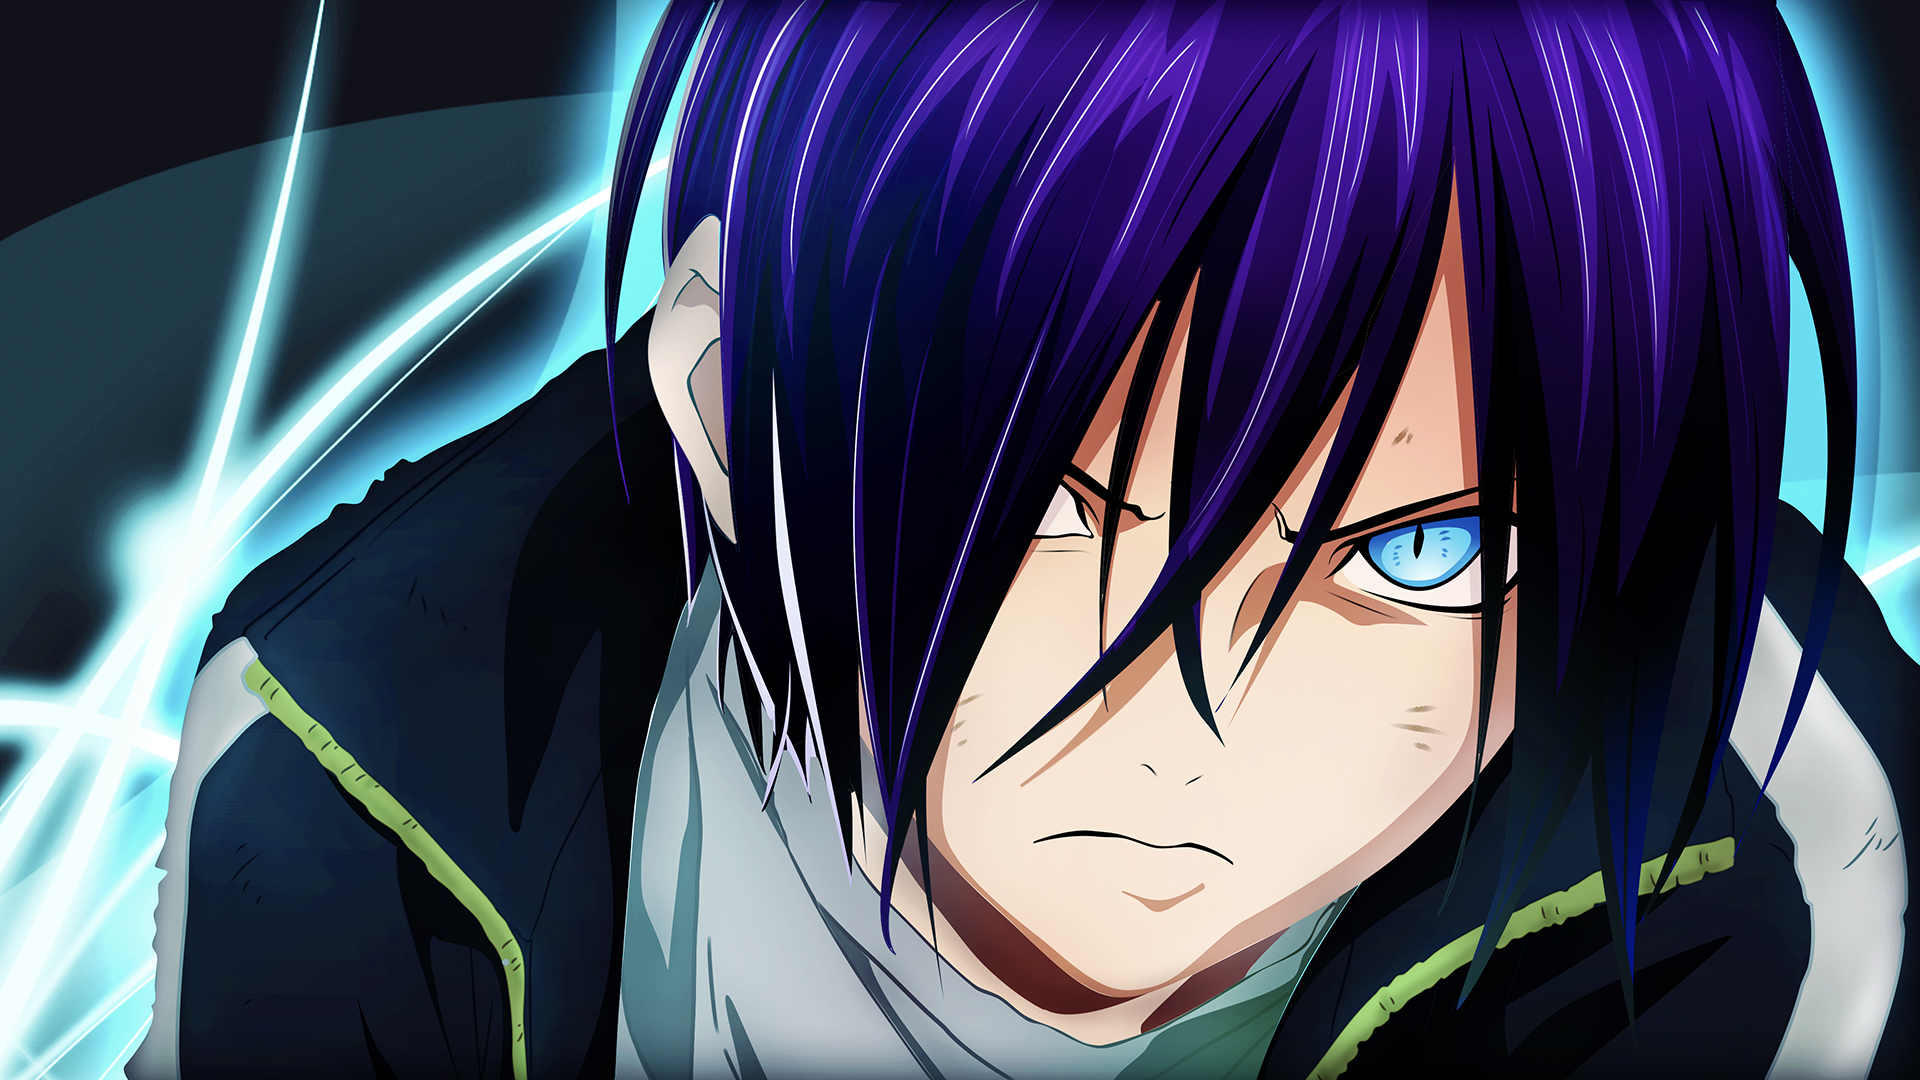 4. "Yato" from Noragami - wide 7